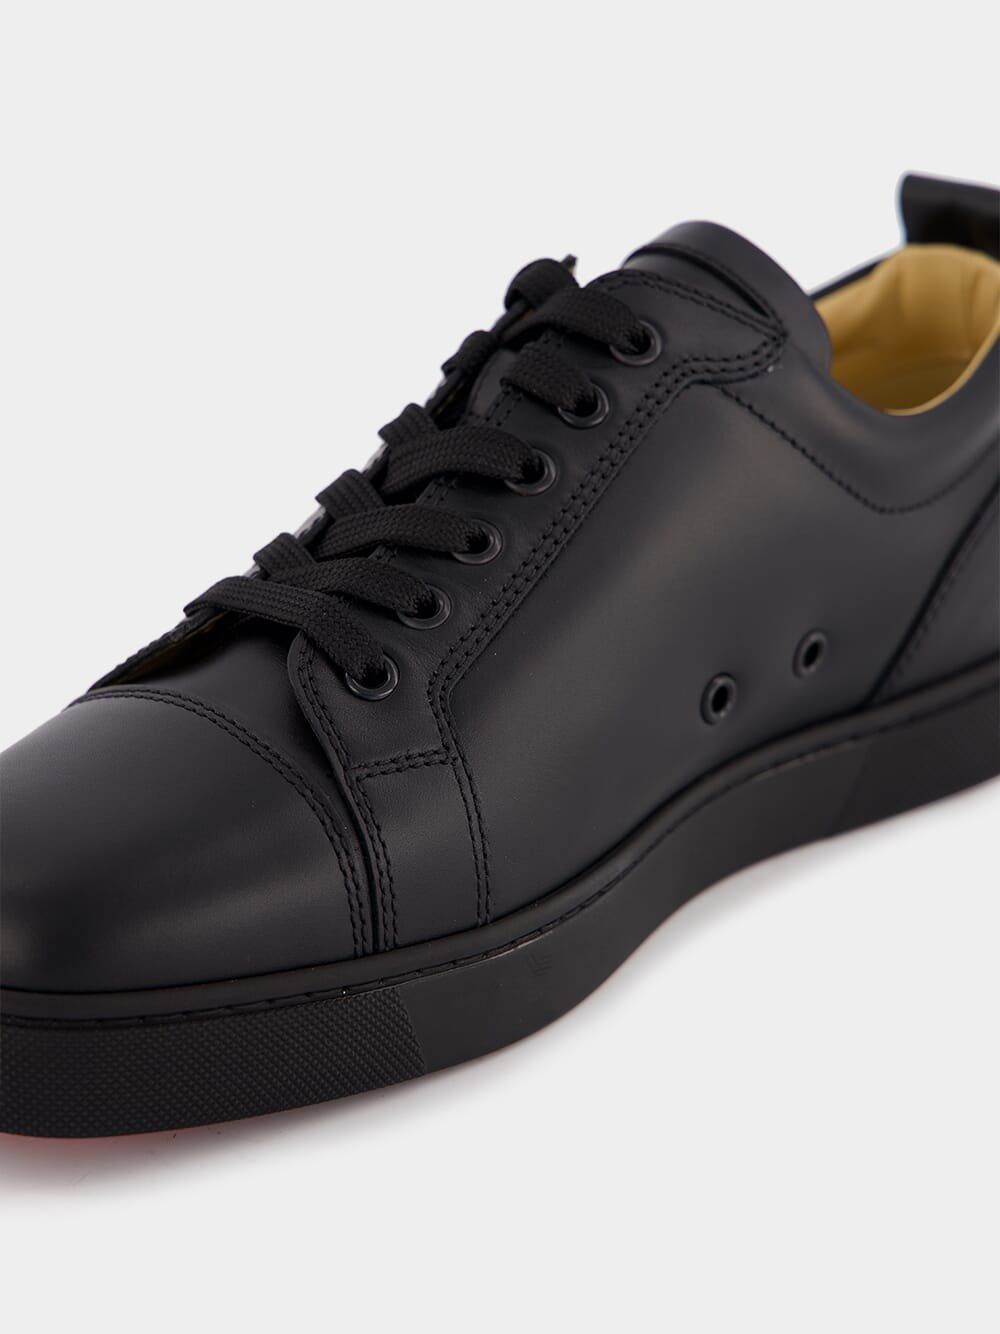 Christian LouboutinLouis Junior Low-Top Leather Sneakers at Fashion Clinic